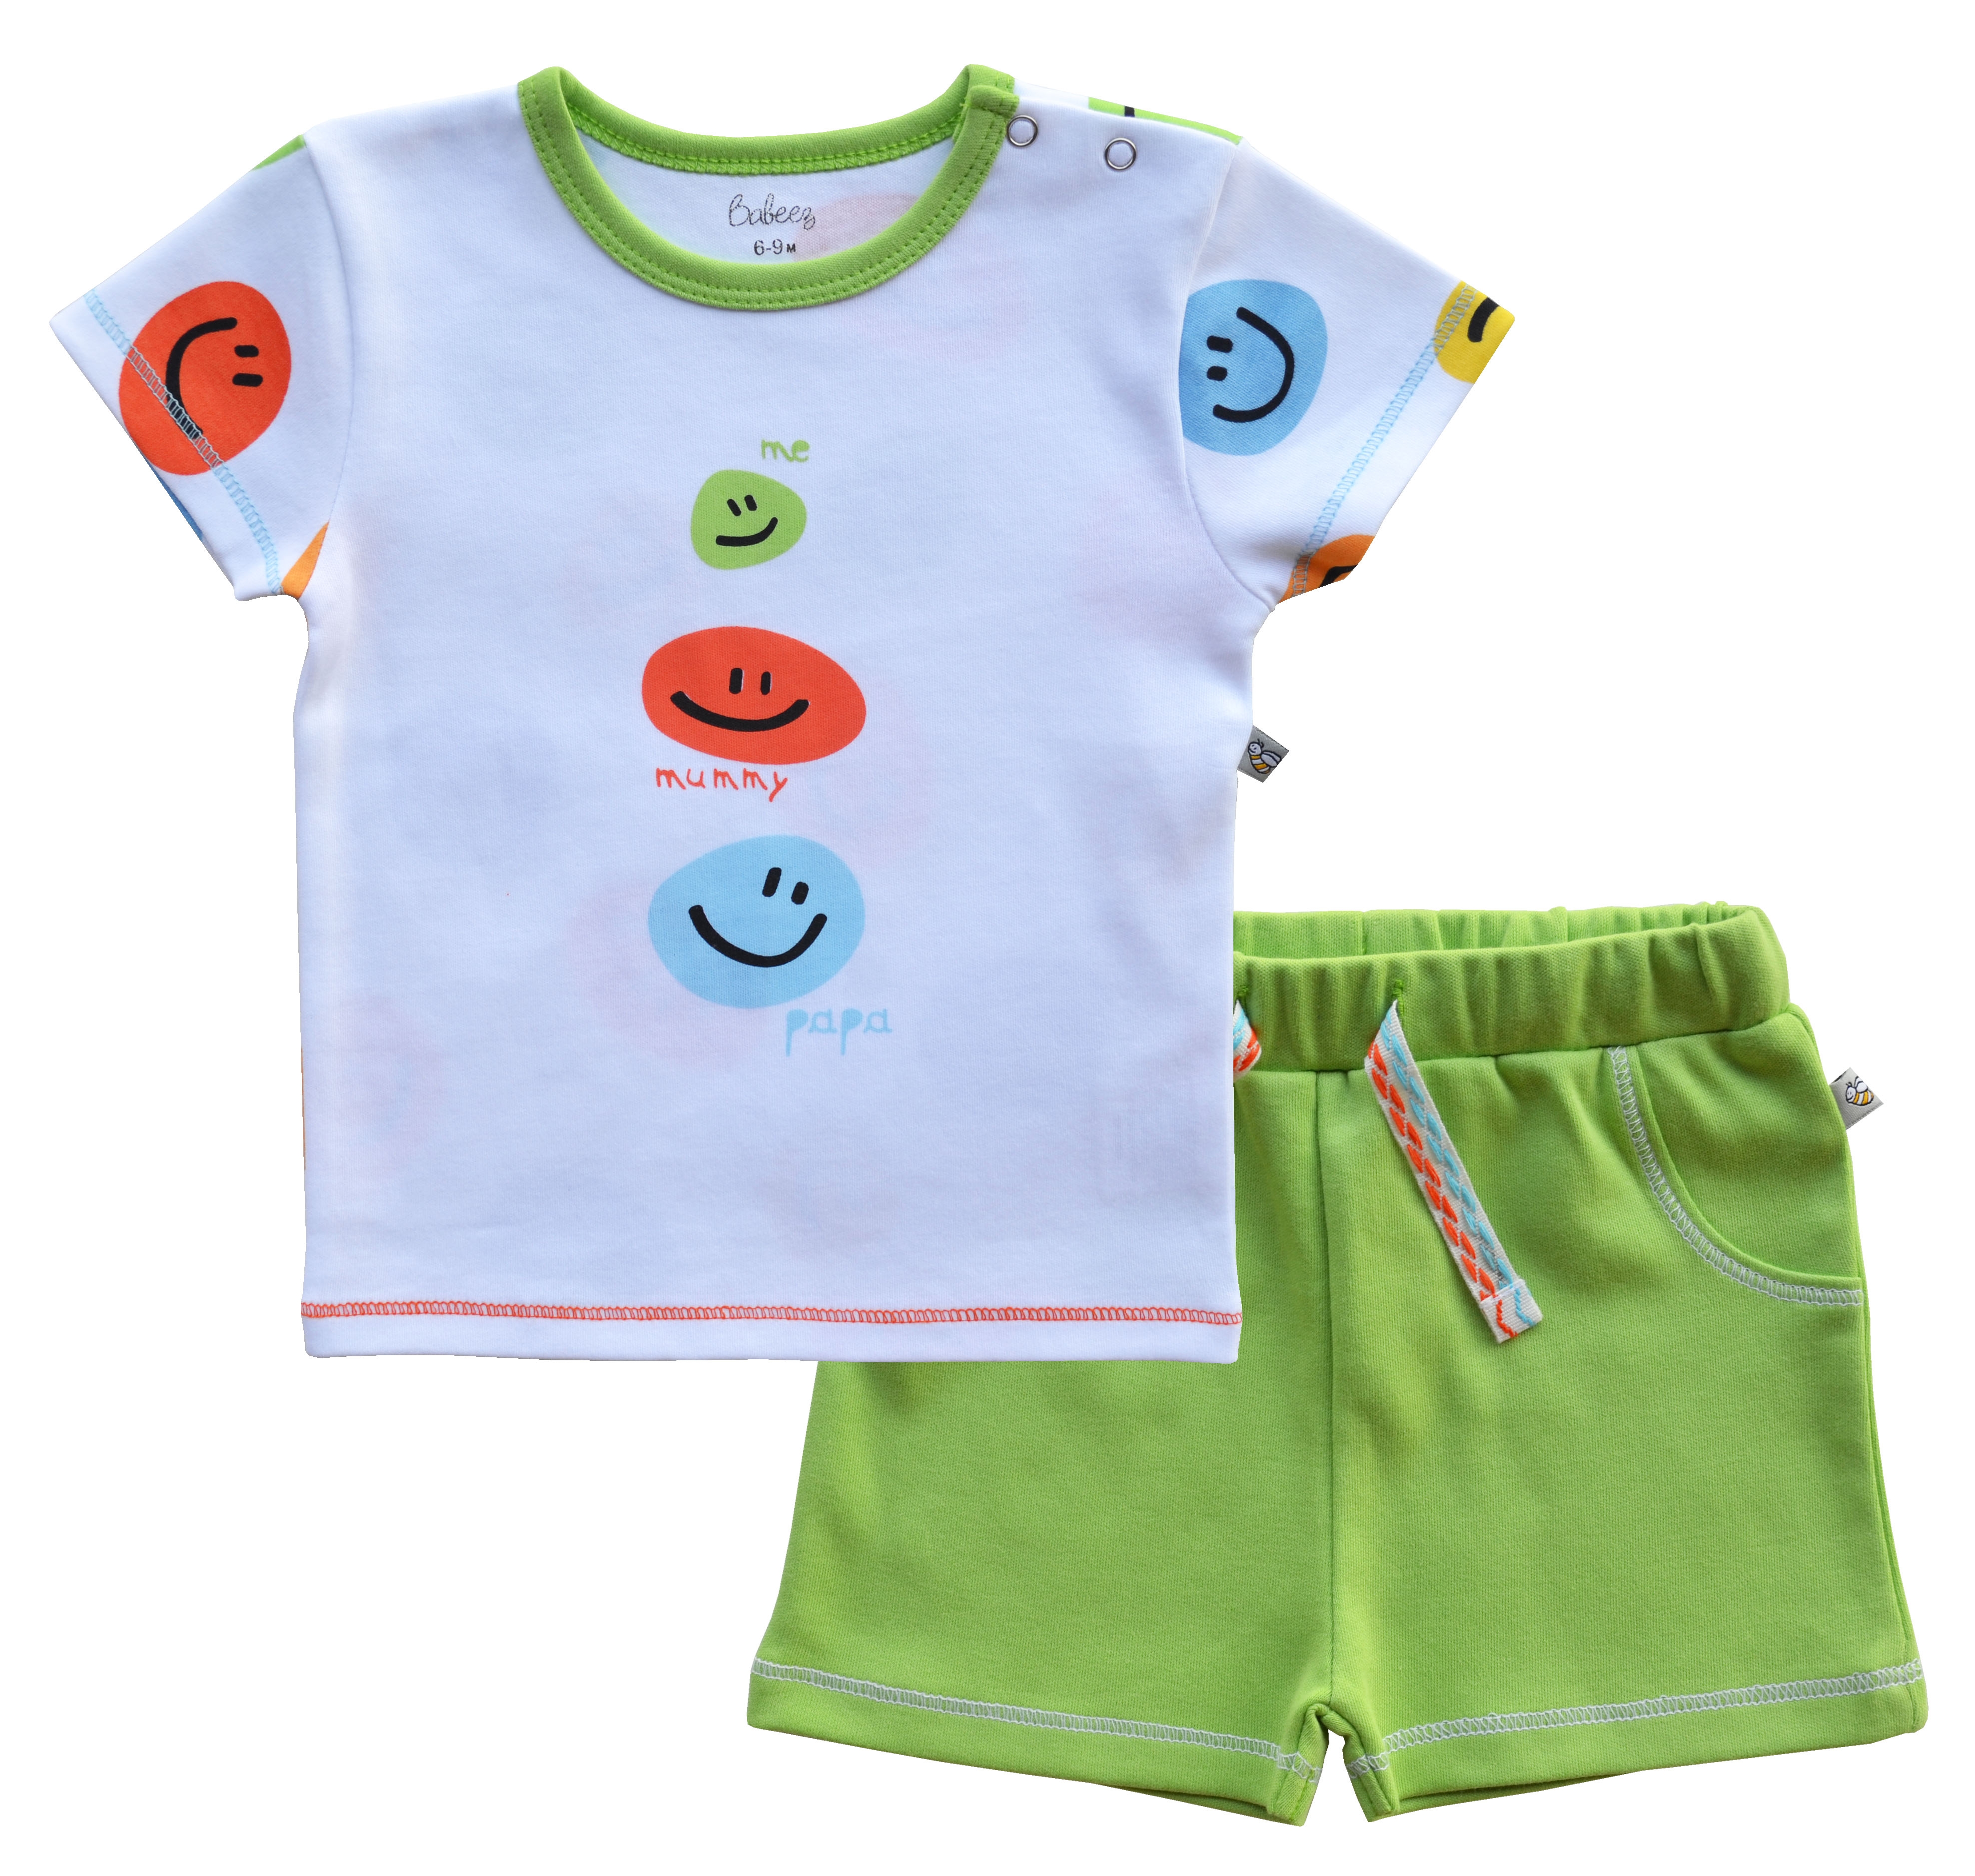 White T-Shirt with Smiley Print and Green Shorts Set (100% Cotton Interlock)